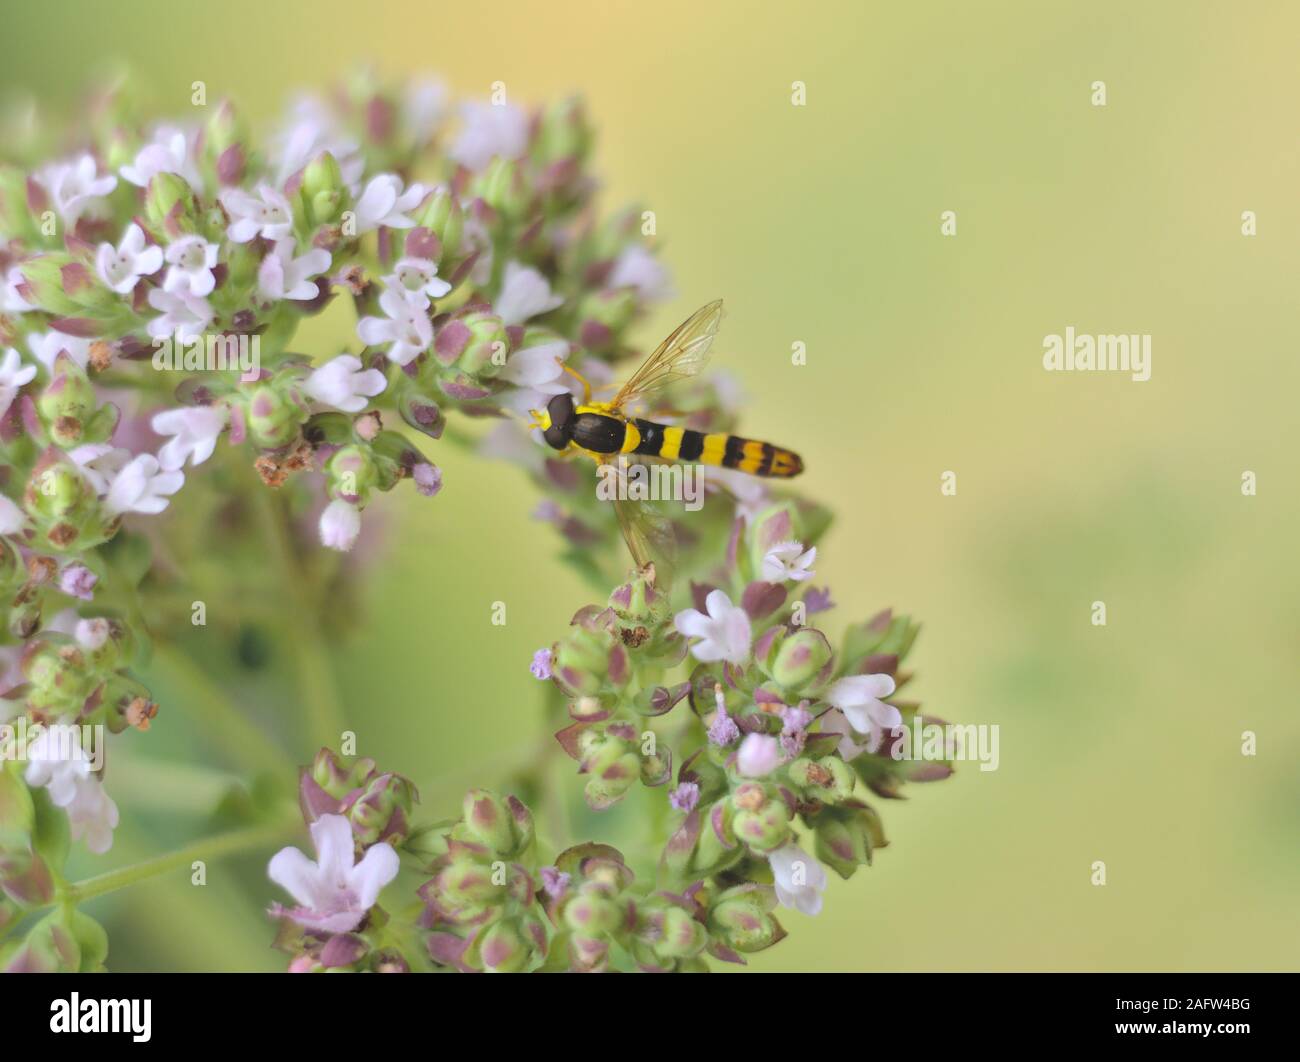 A hoverfly sitting on a flower in front of soft green background in Bavaria Stock Photo